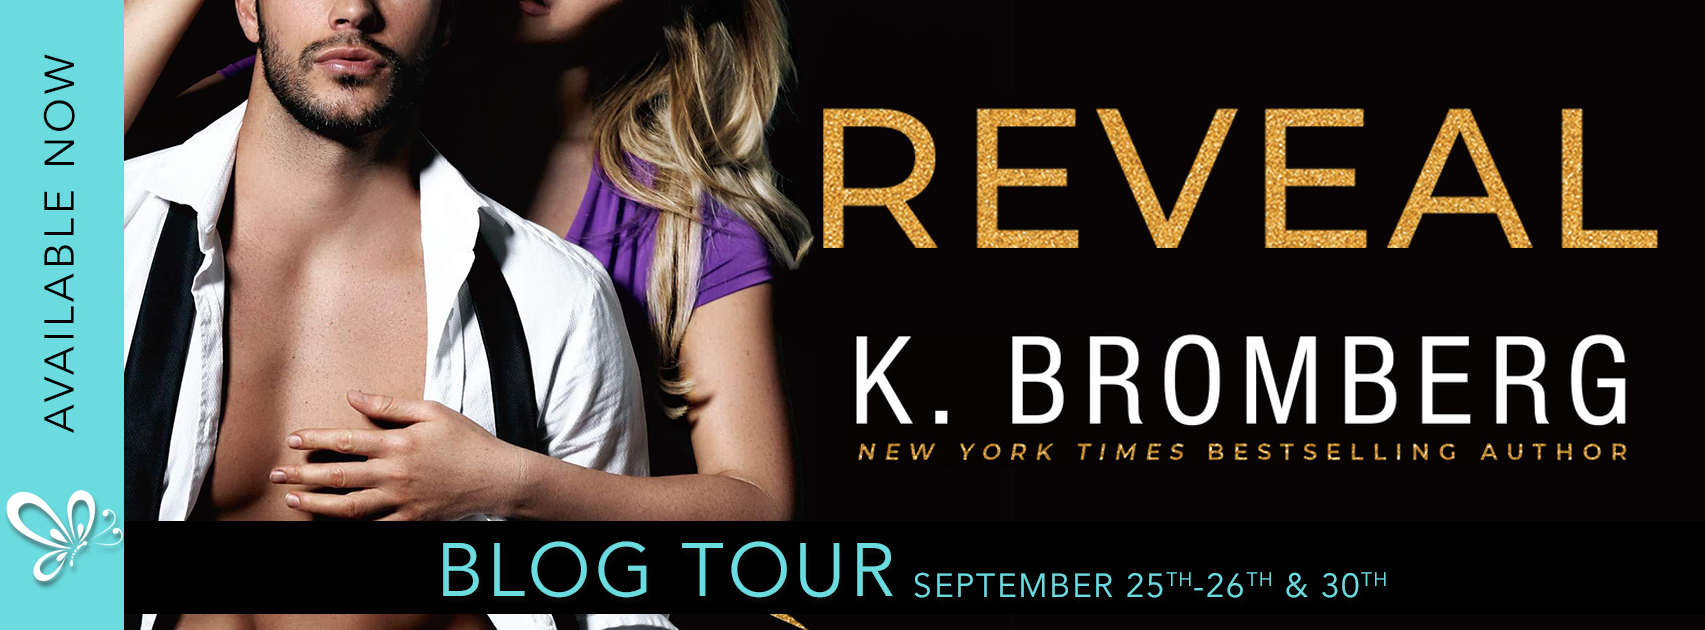 Blog Tour Review with Excerpt:  Reveal (Wicked Ways #2) by K. Bromberg